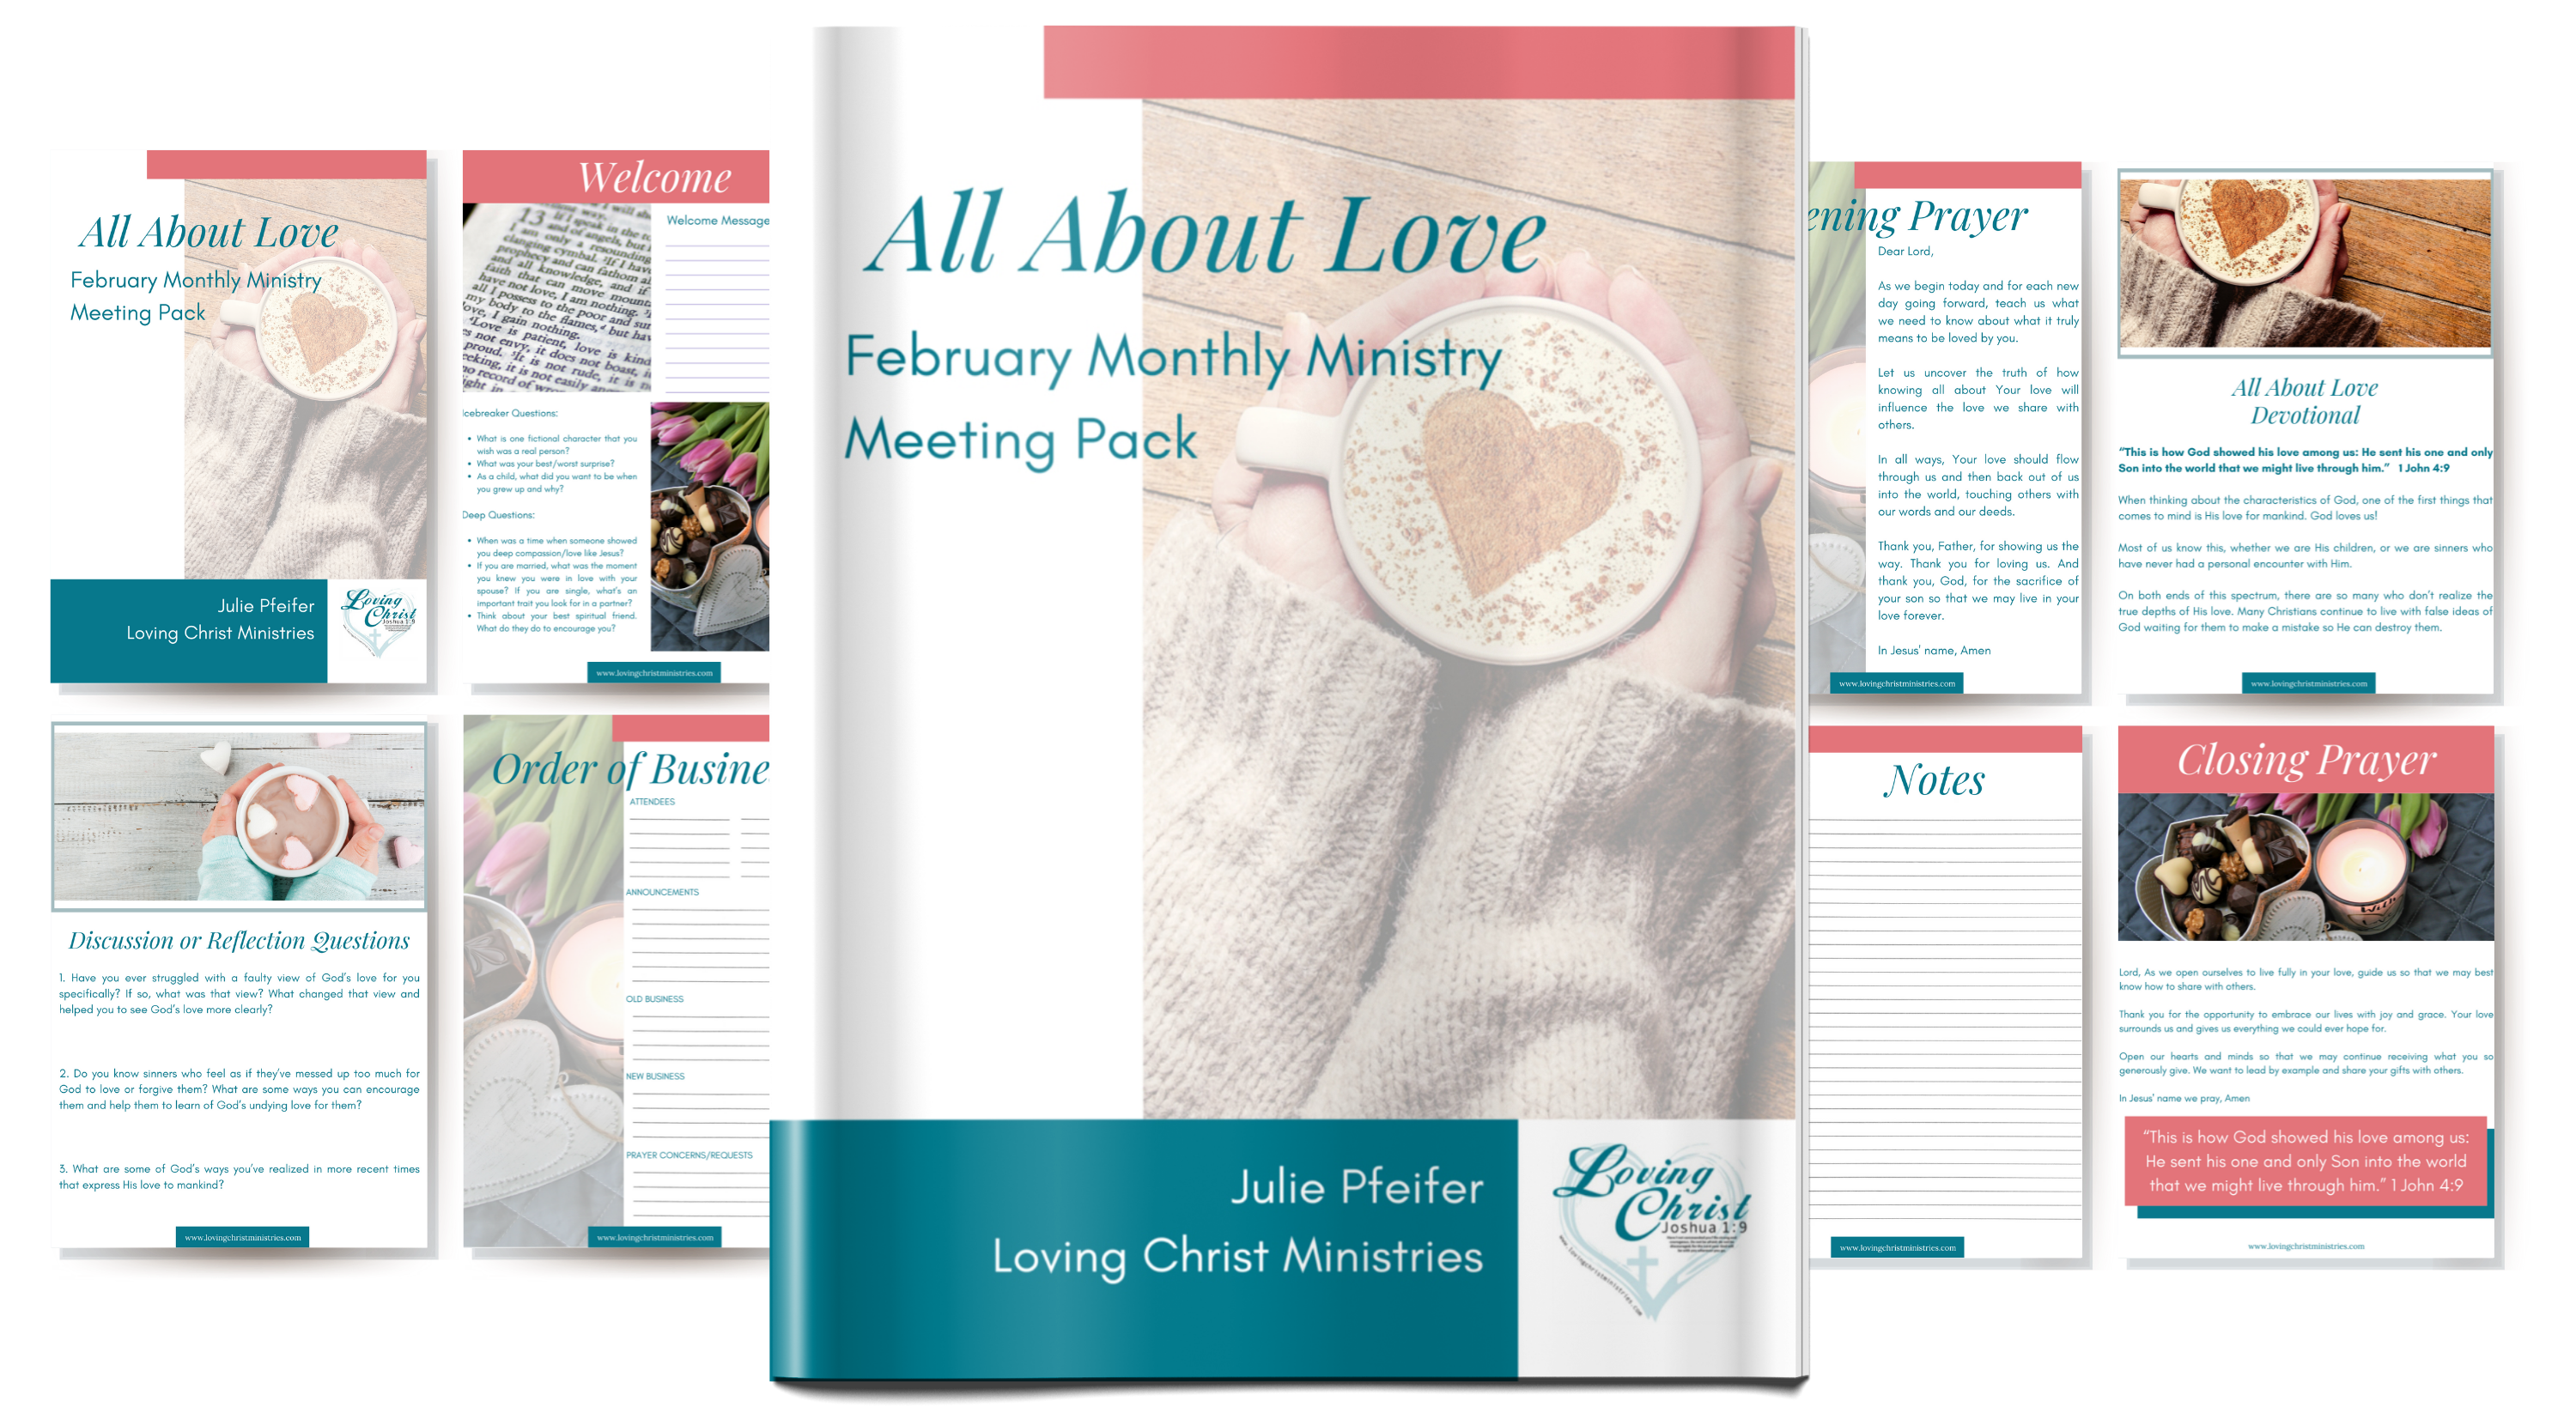 February Monthly Ministry Meeting Pack - All about Love